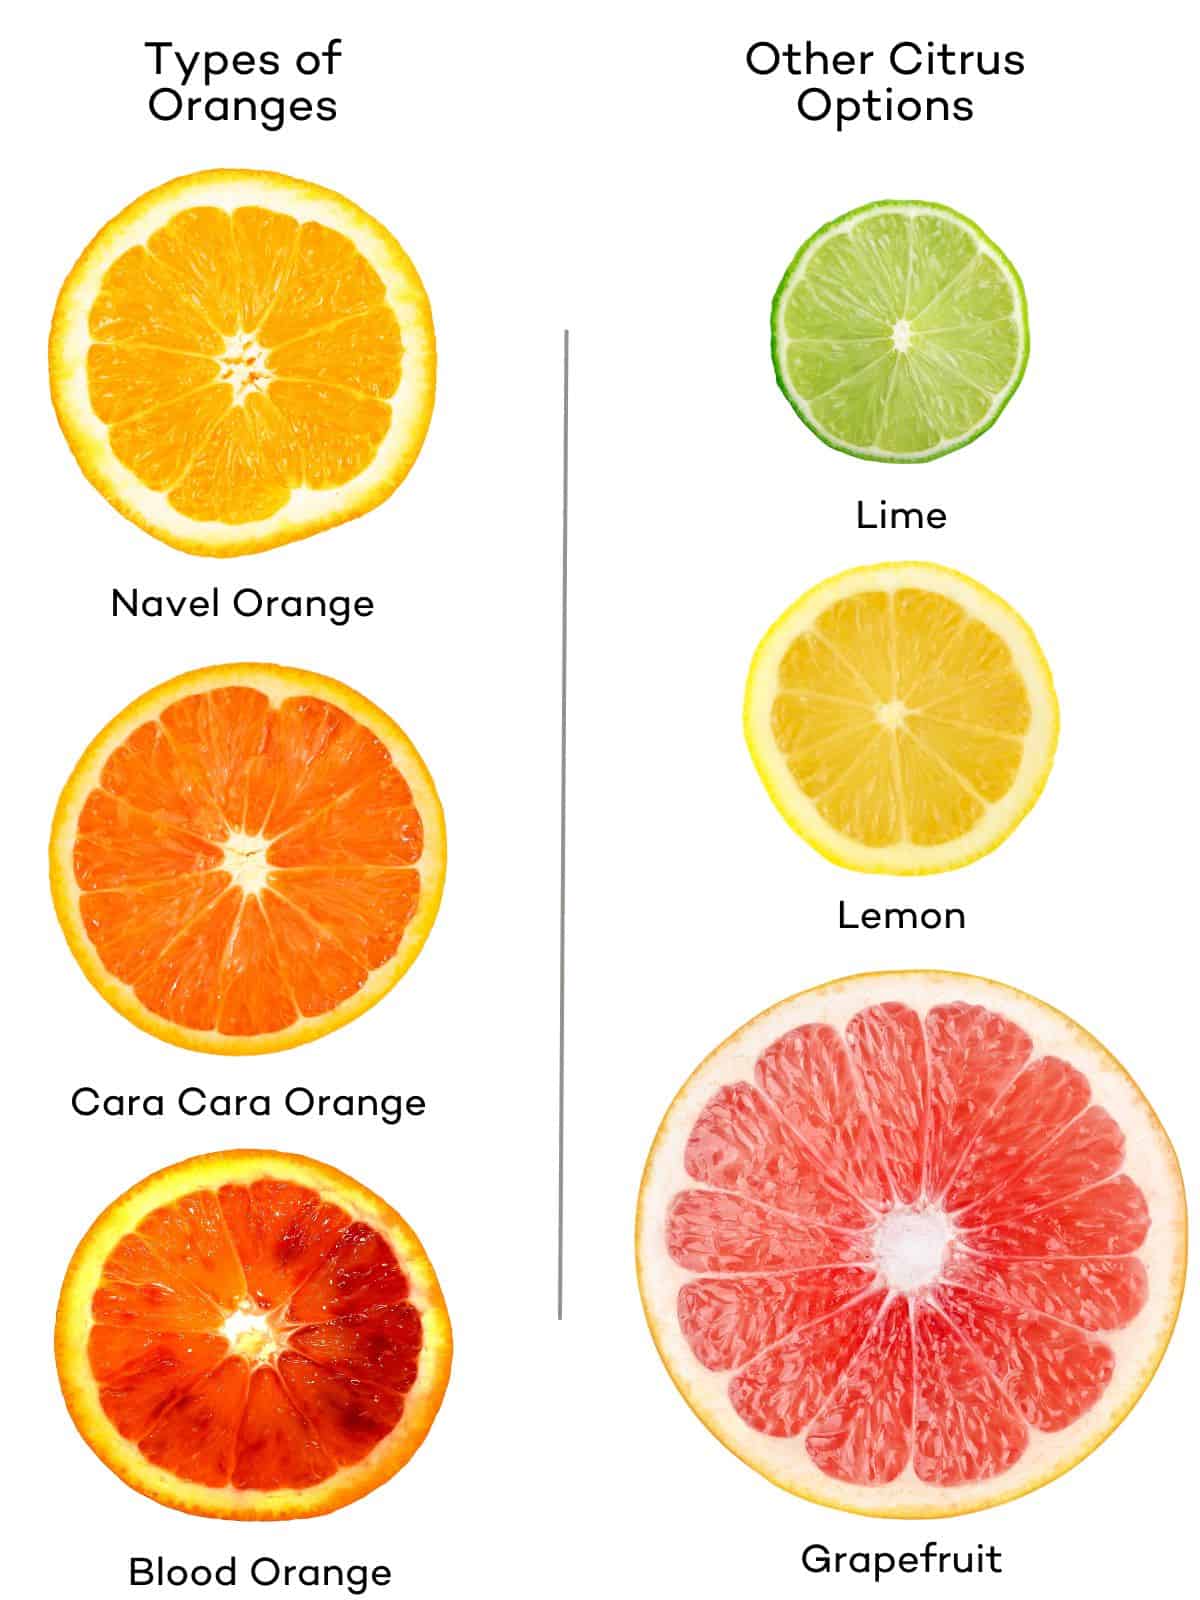 Types of oranges (navel, cara cara, blood) and other citrus (lime, lemon, grapefruit) that can be oven dried. 